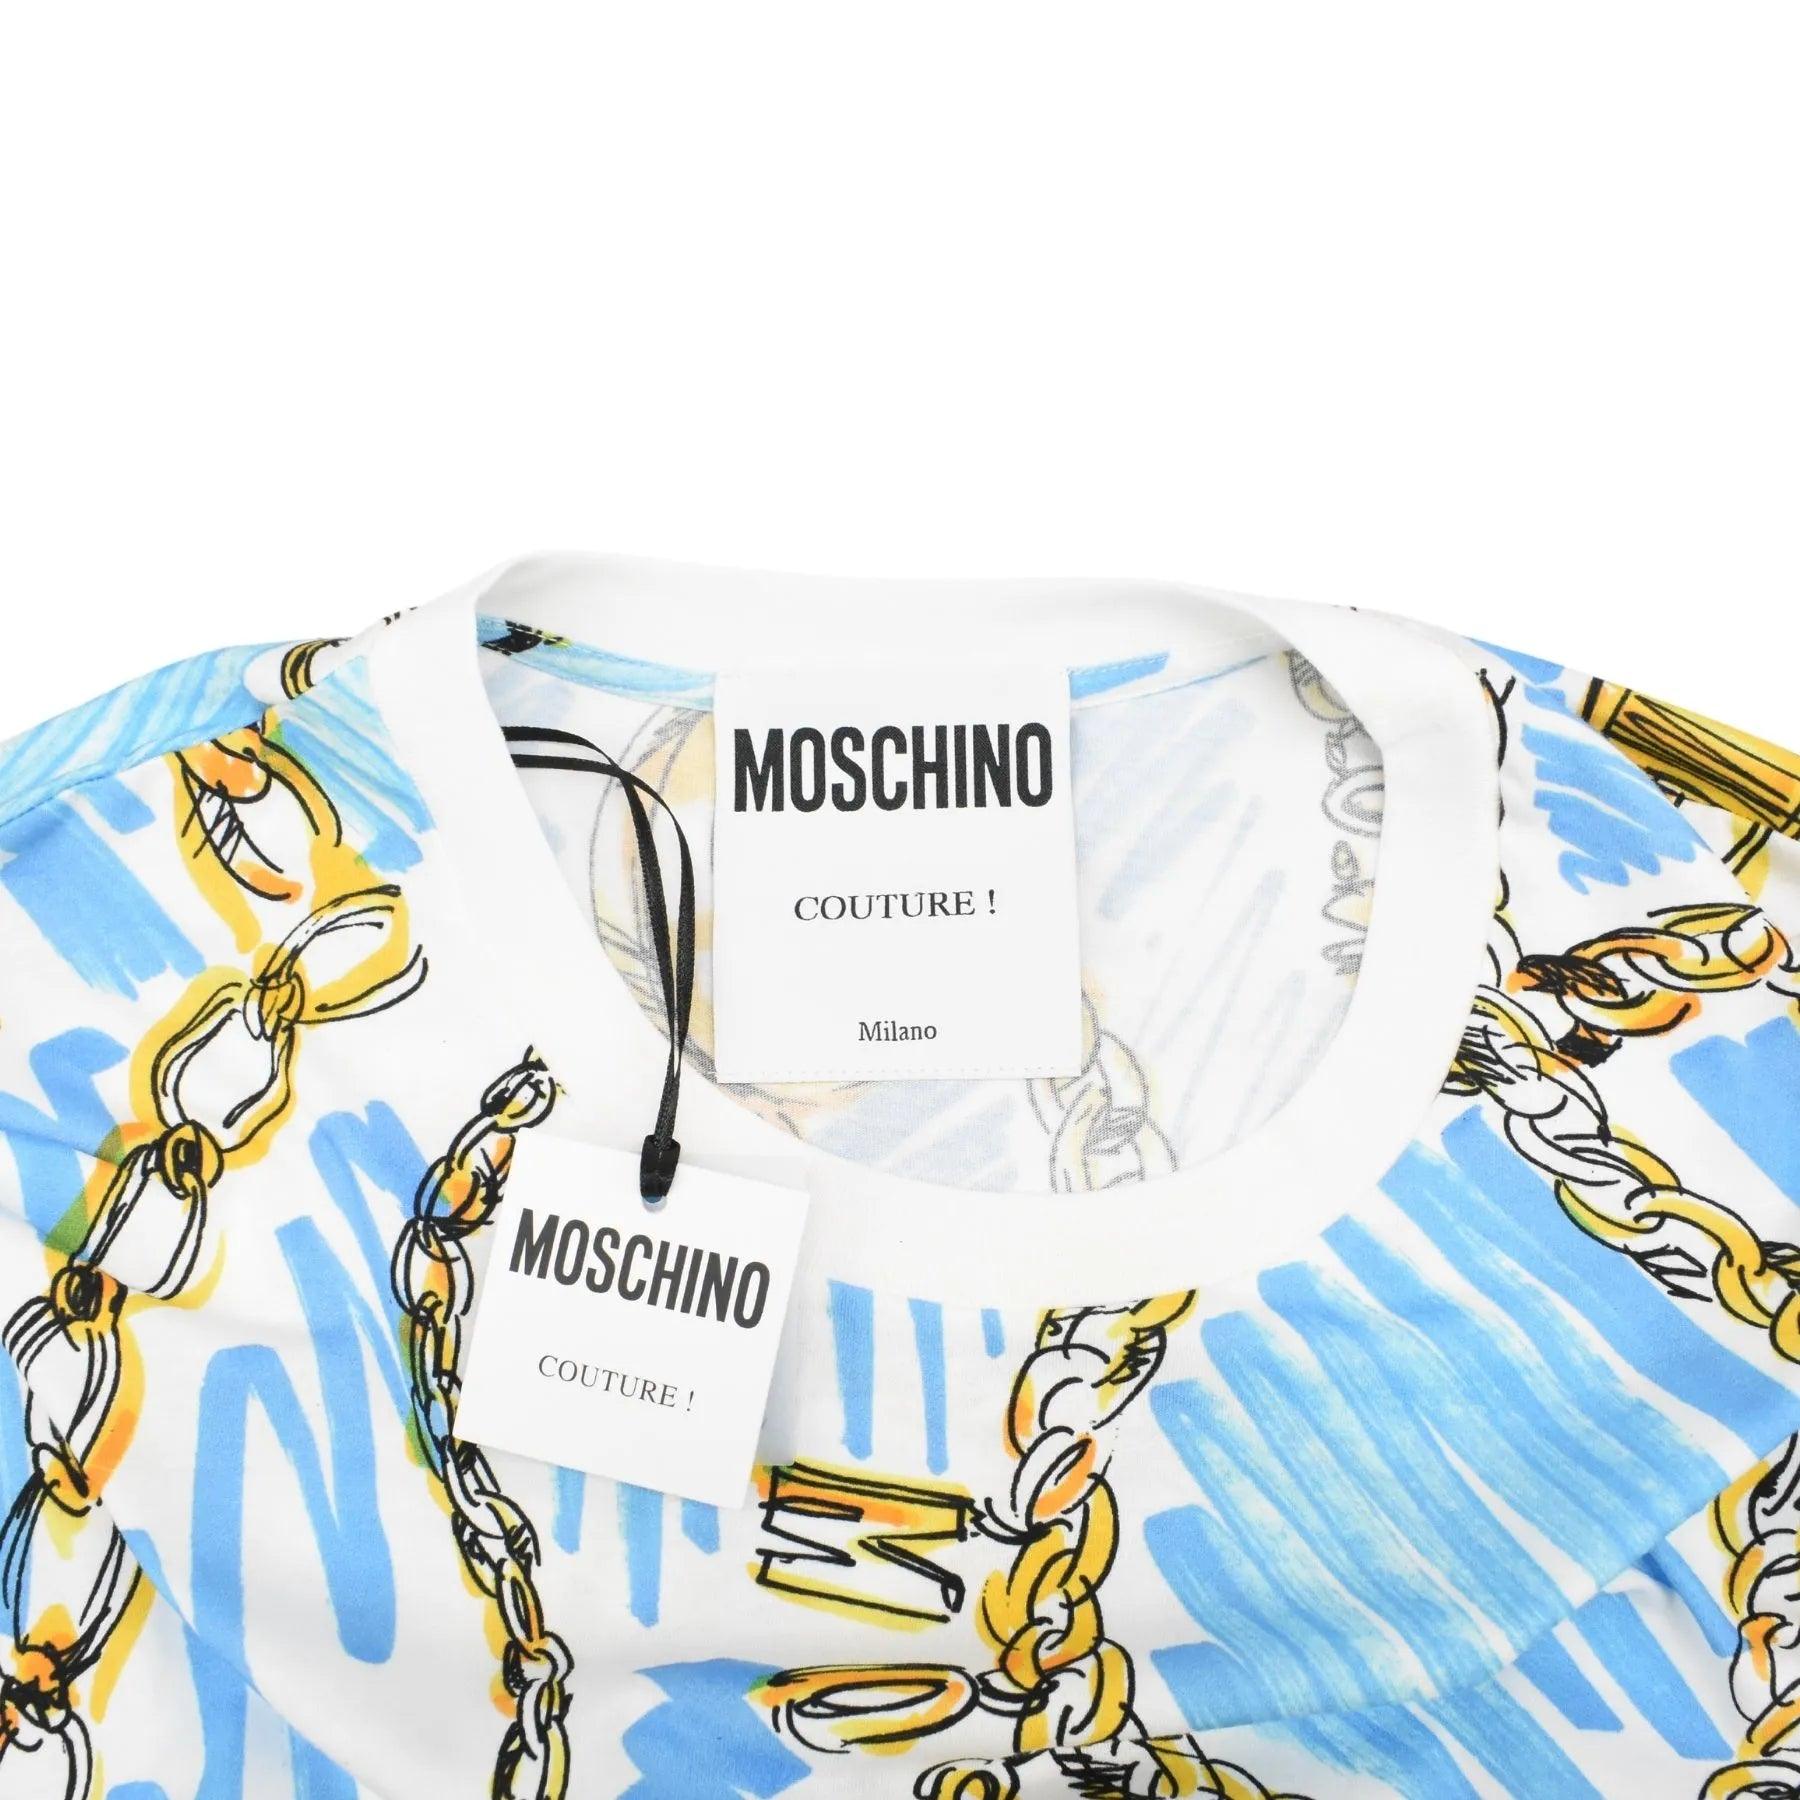 Moschino T-Shirt - Men's Large - Fashionably Yours